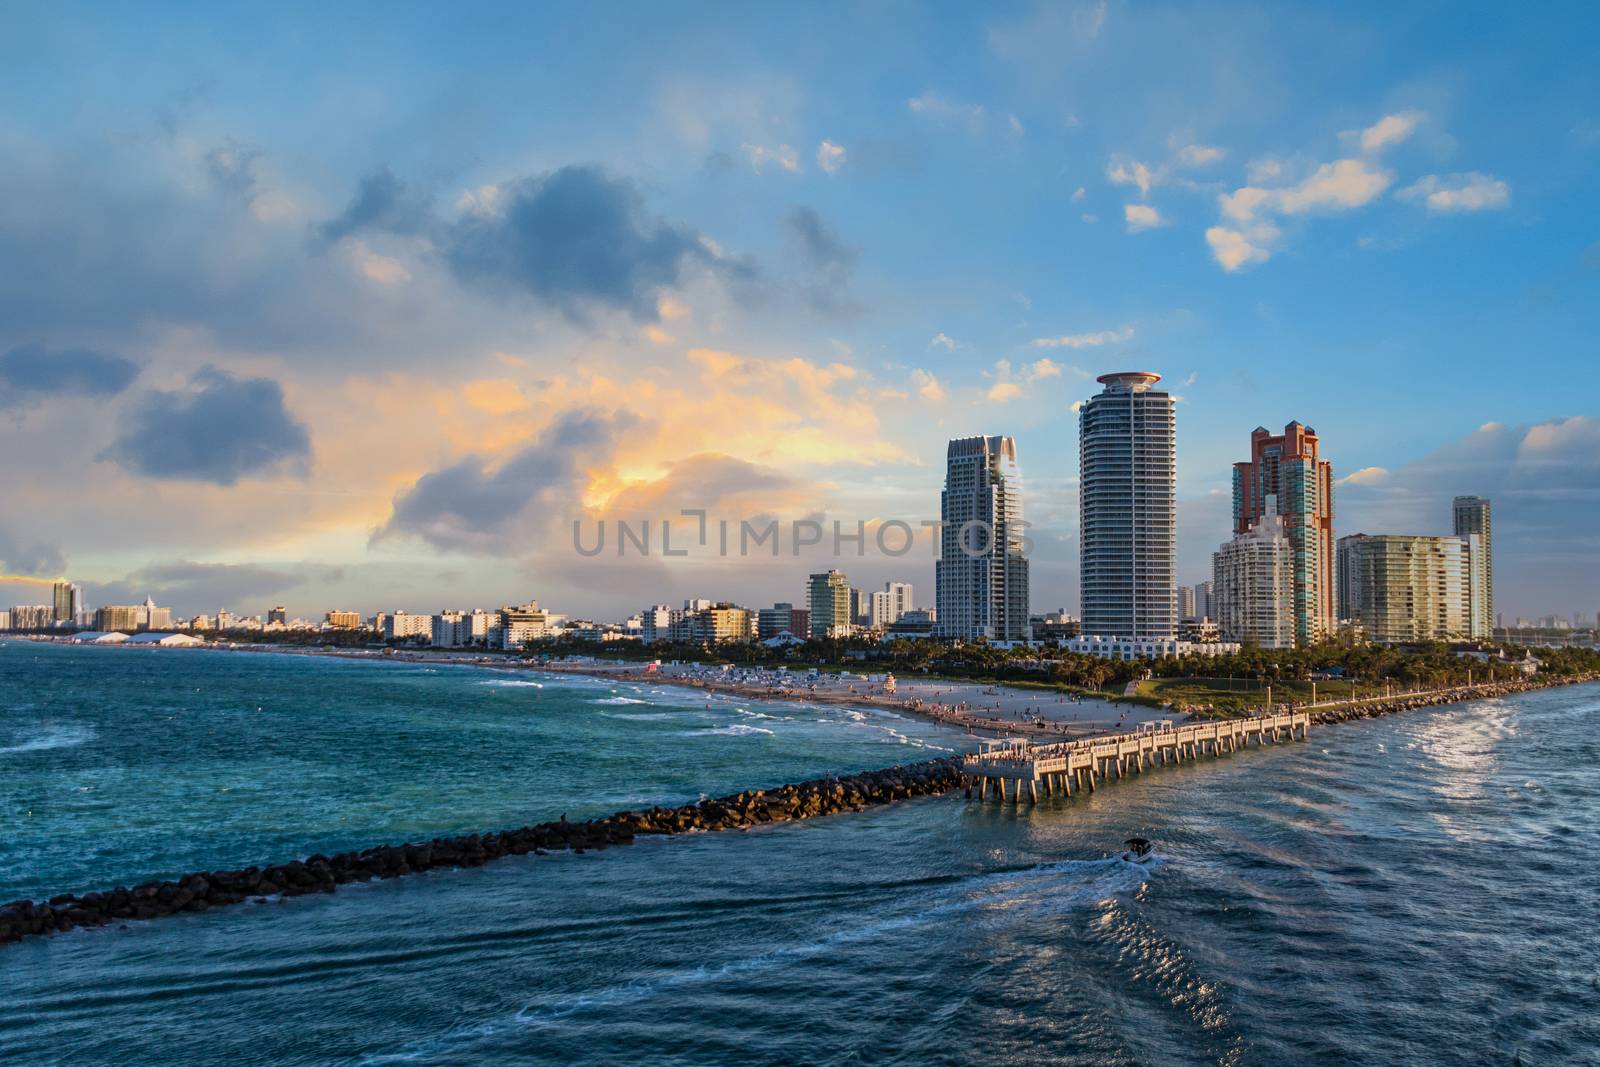 Miami Beach and Condos in Afternoon Light